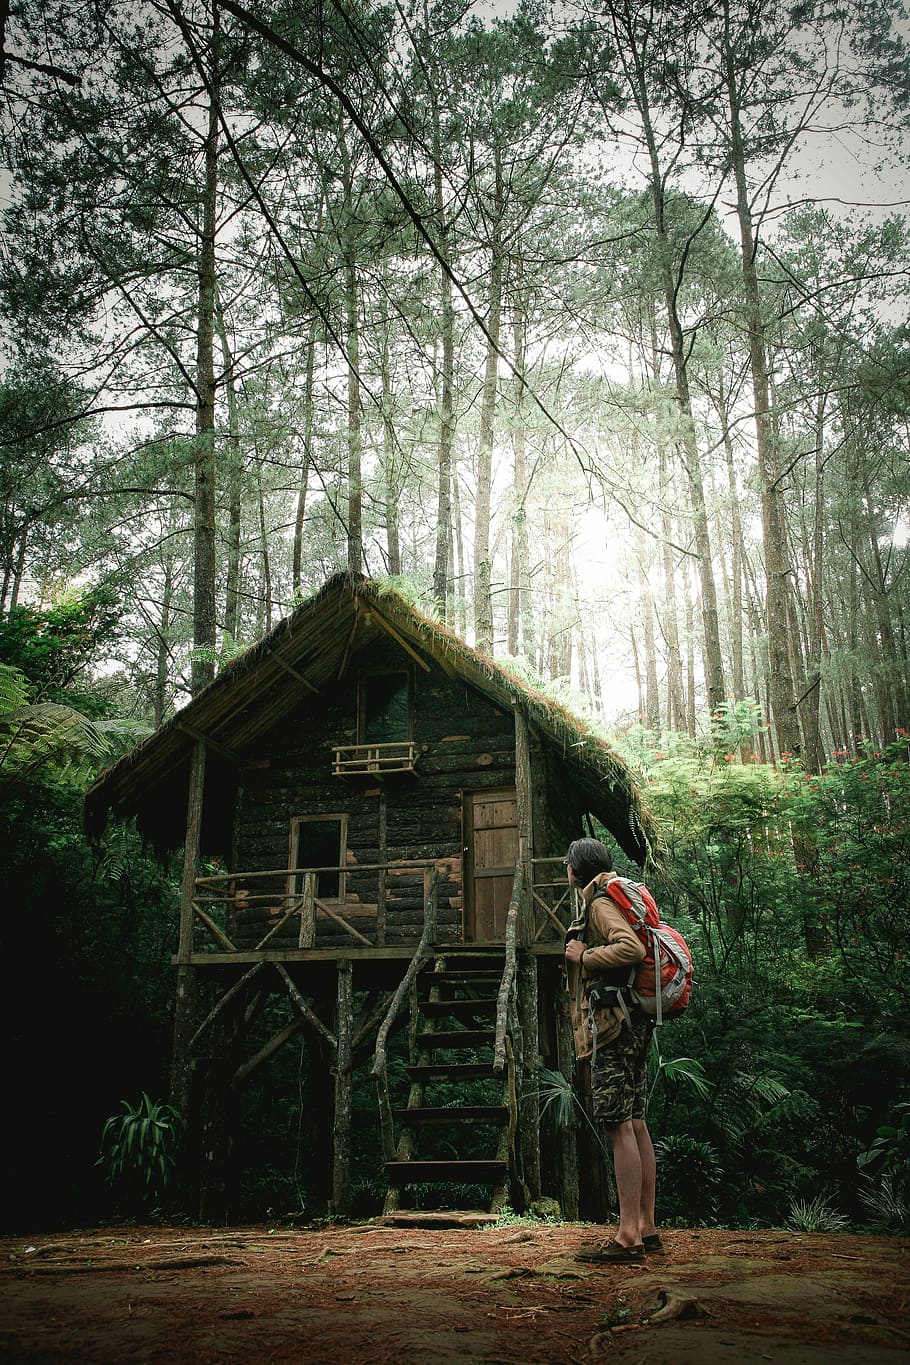 mountaineer standing in the middle of forest nearby hut, person standing near house and tress